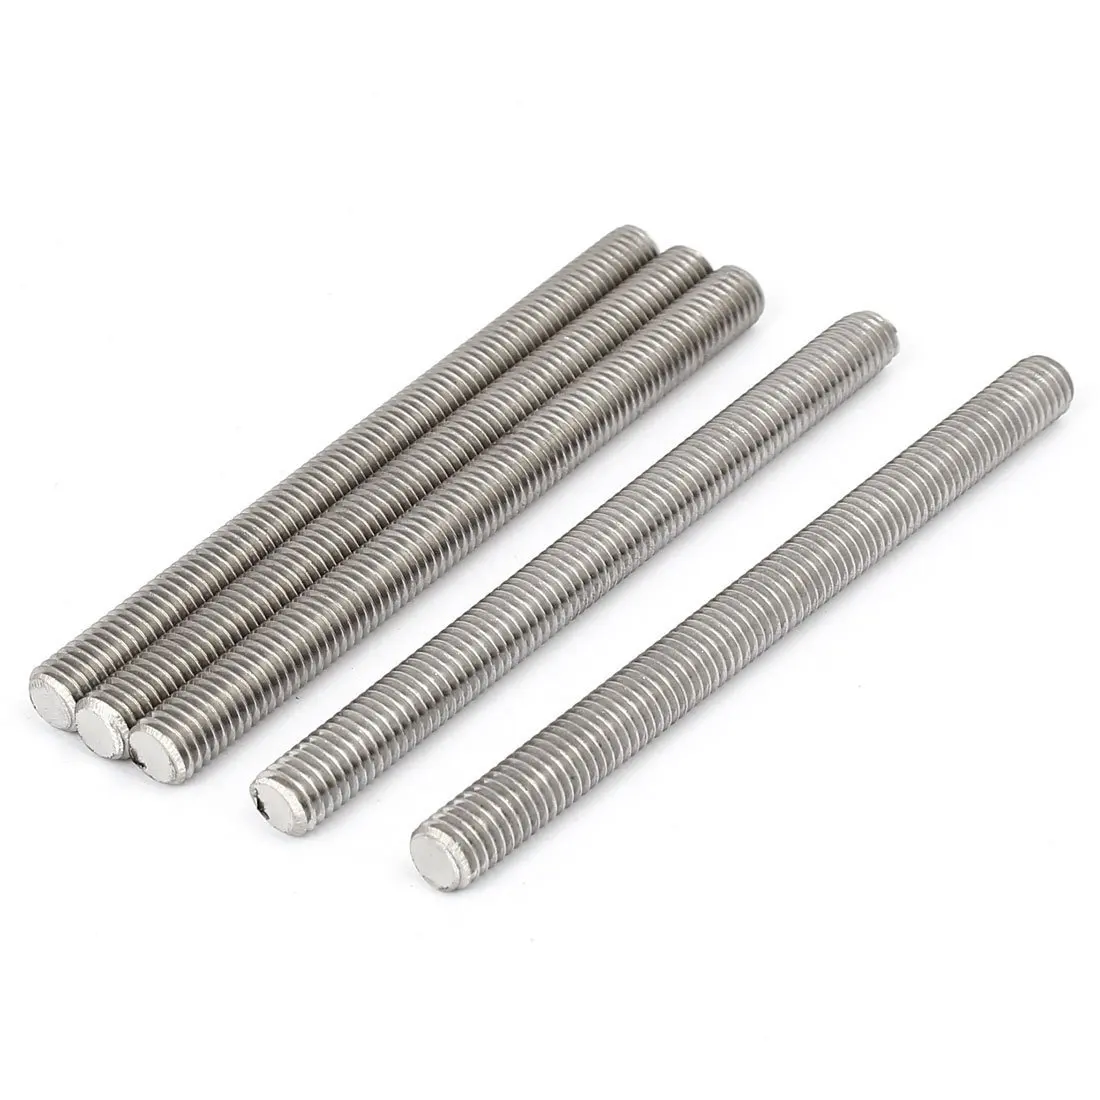 Cheap Acme Threaded Rods, find Acme Threaded Rods deals on line at